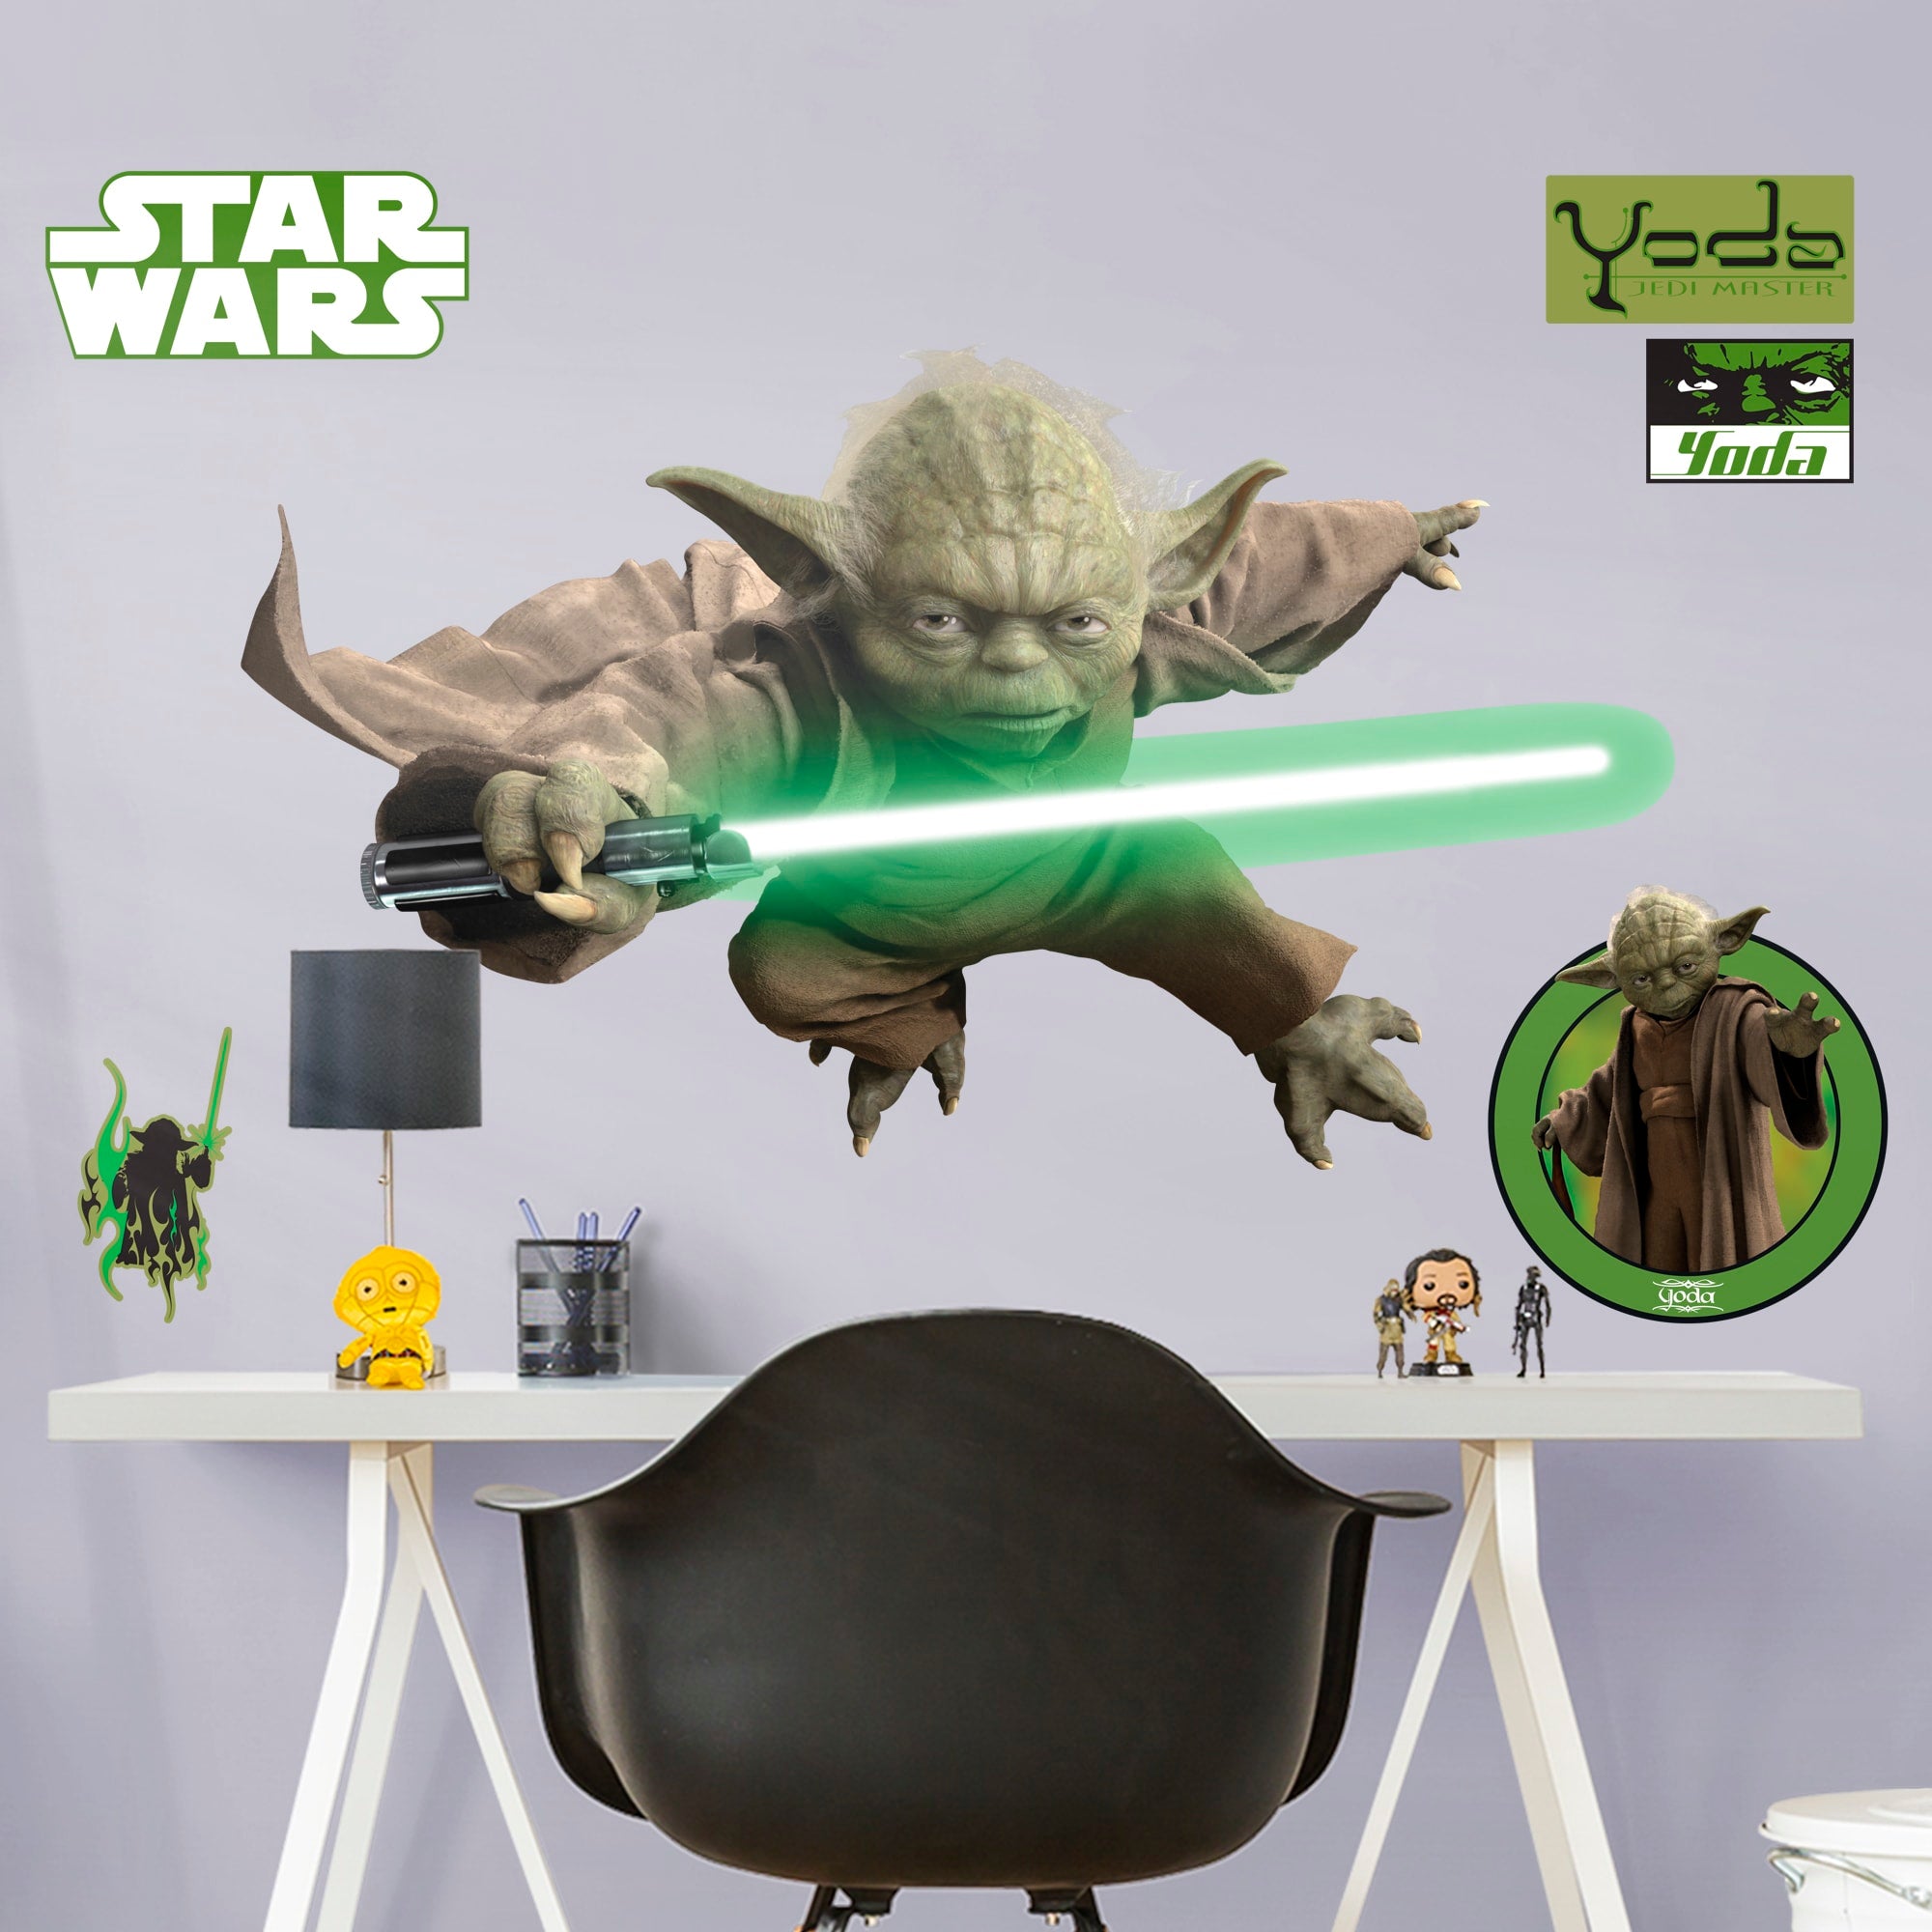 Yoda - Officially Licensed Removable Wall Decal Life-Size Character + 5 Decals (45"W x 26"H) by Fathead | Vinyl